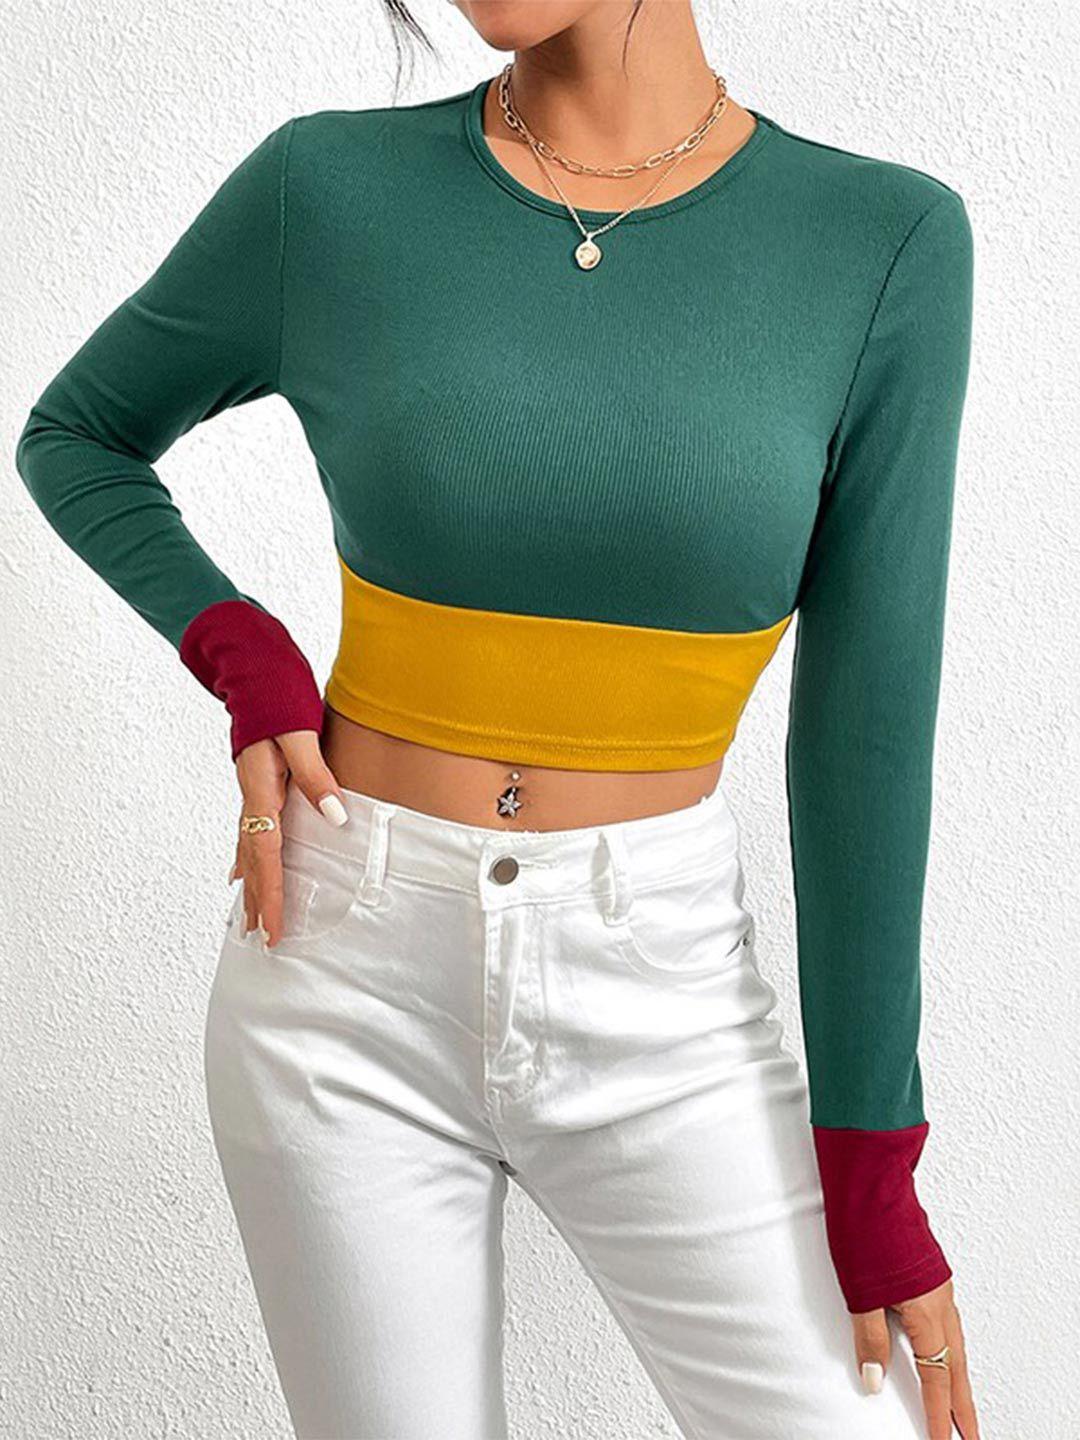 stylecast green colourblocked extended sleeves crop top